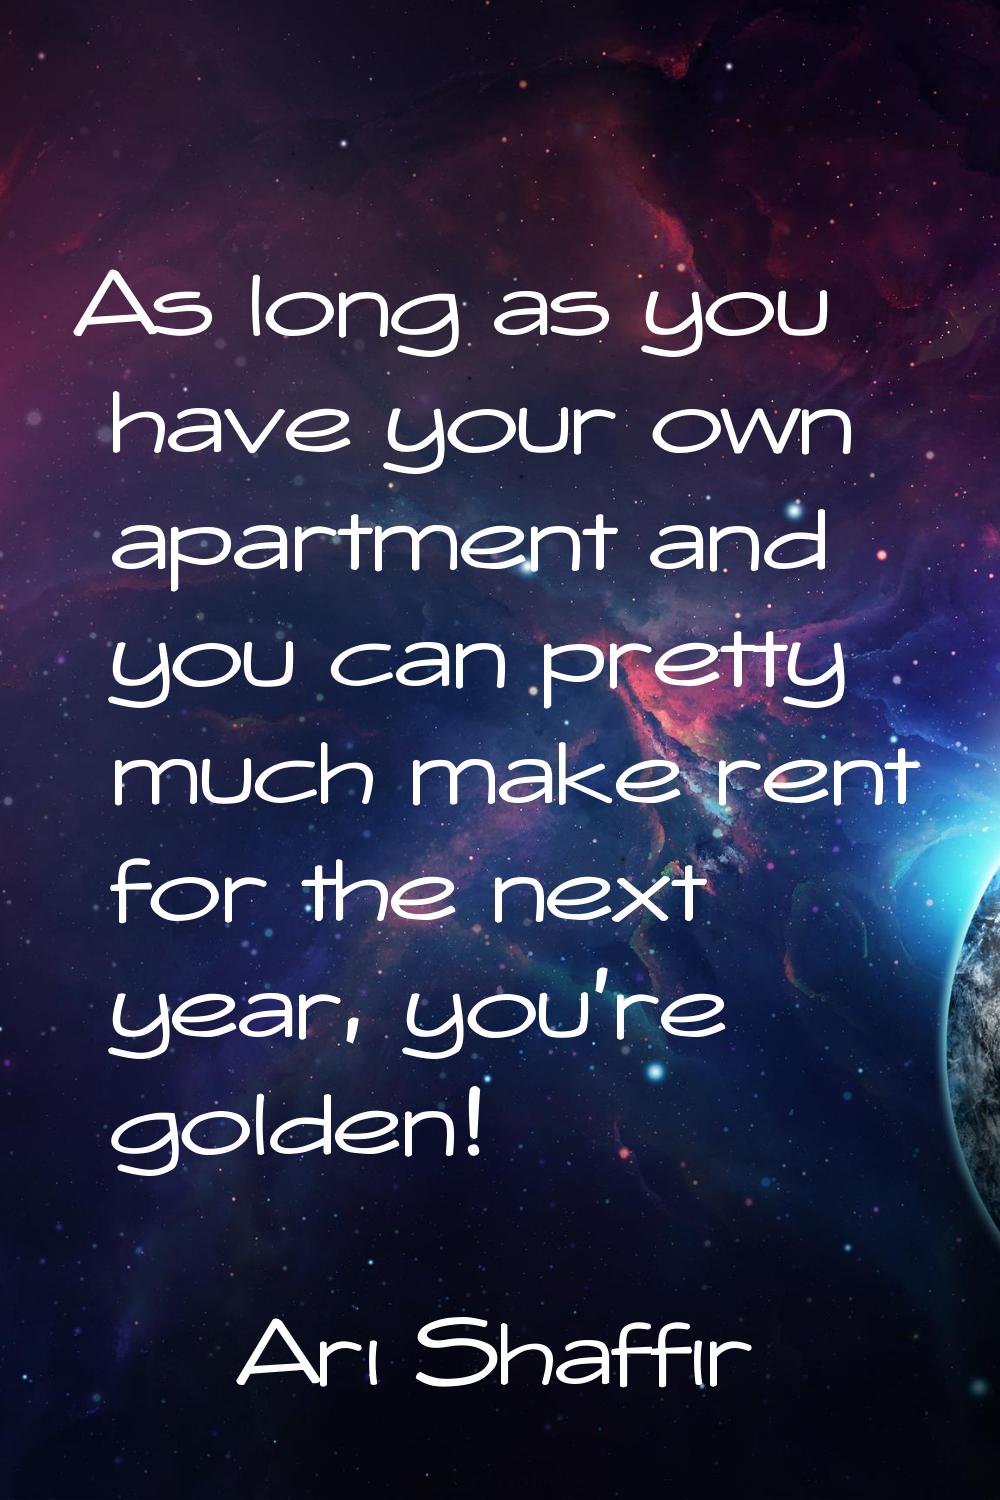 As long as you have your own apartment and you can pretty much make rent for the next year, you're 